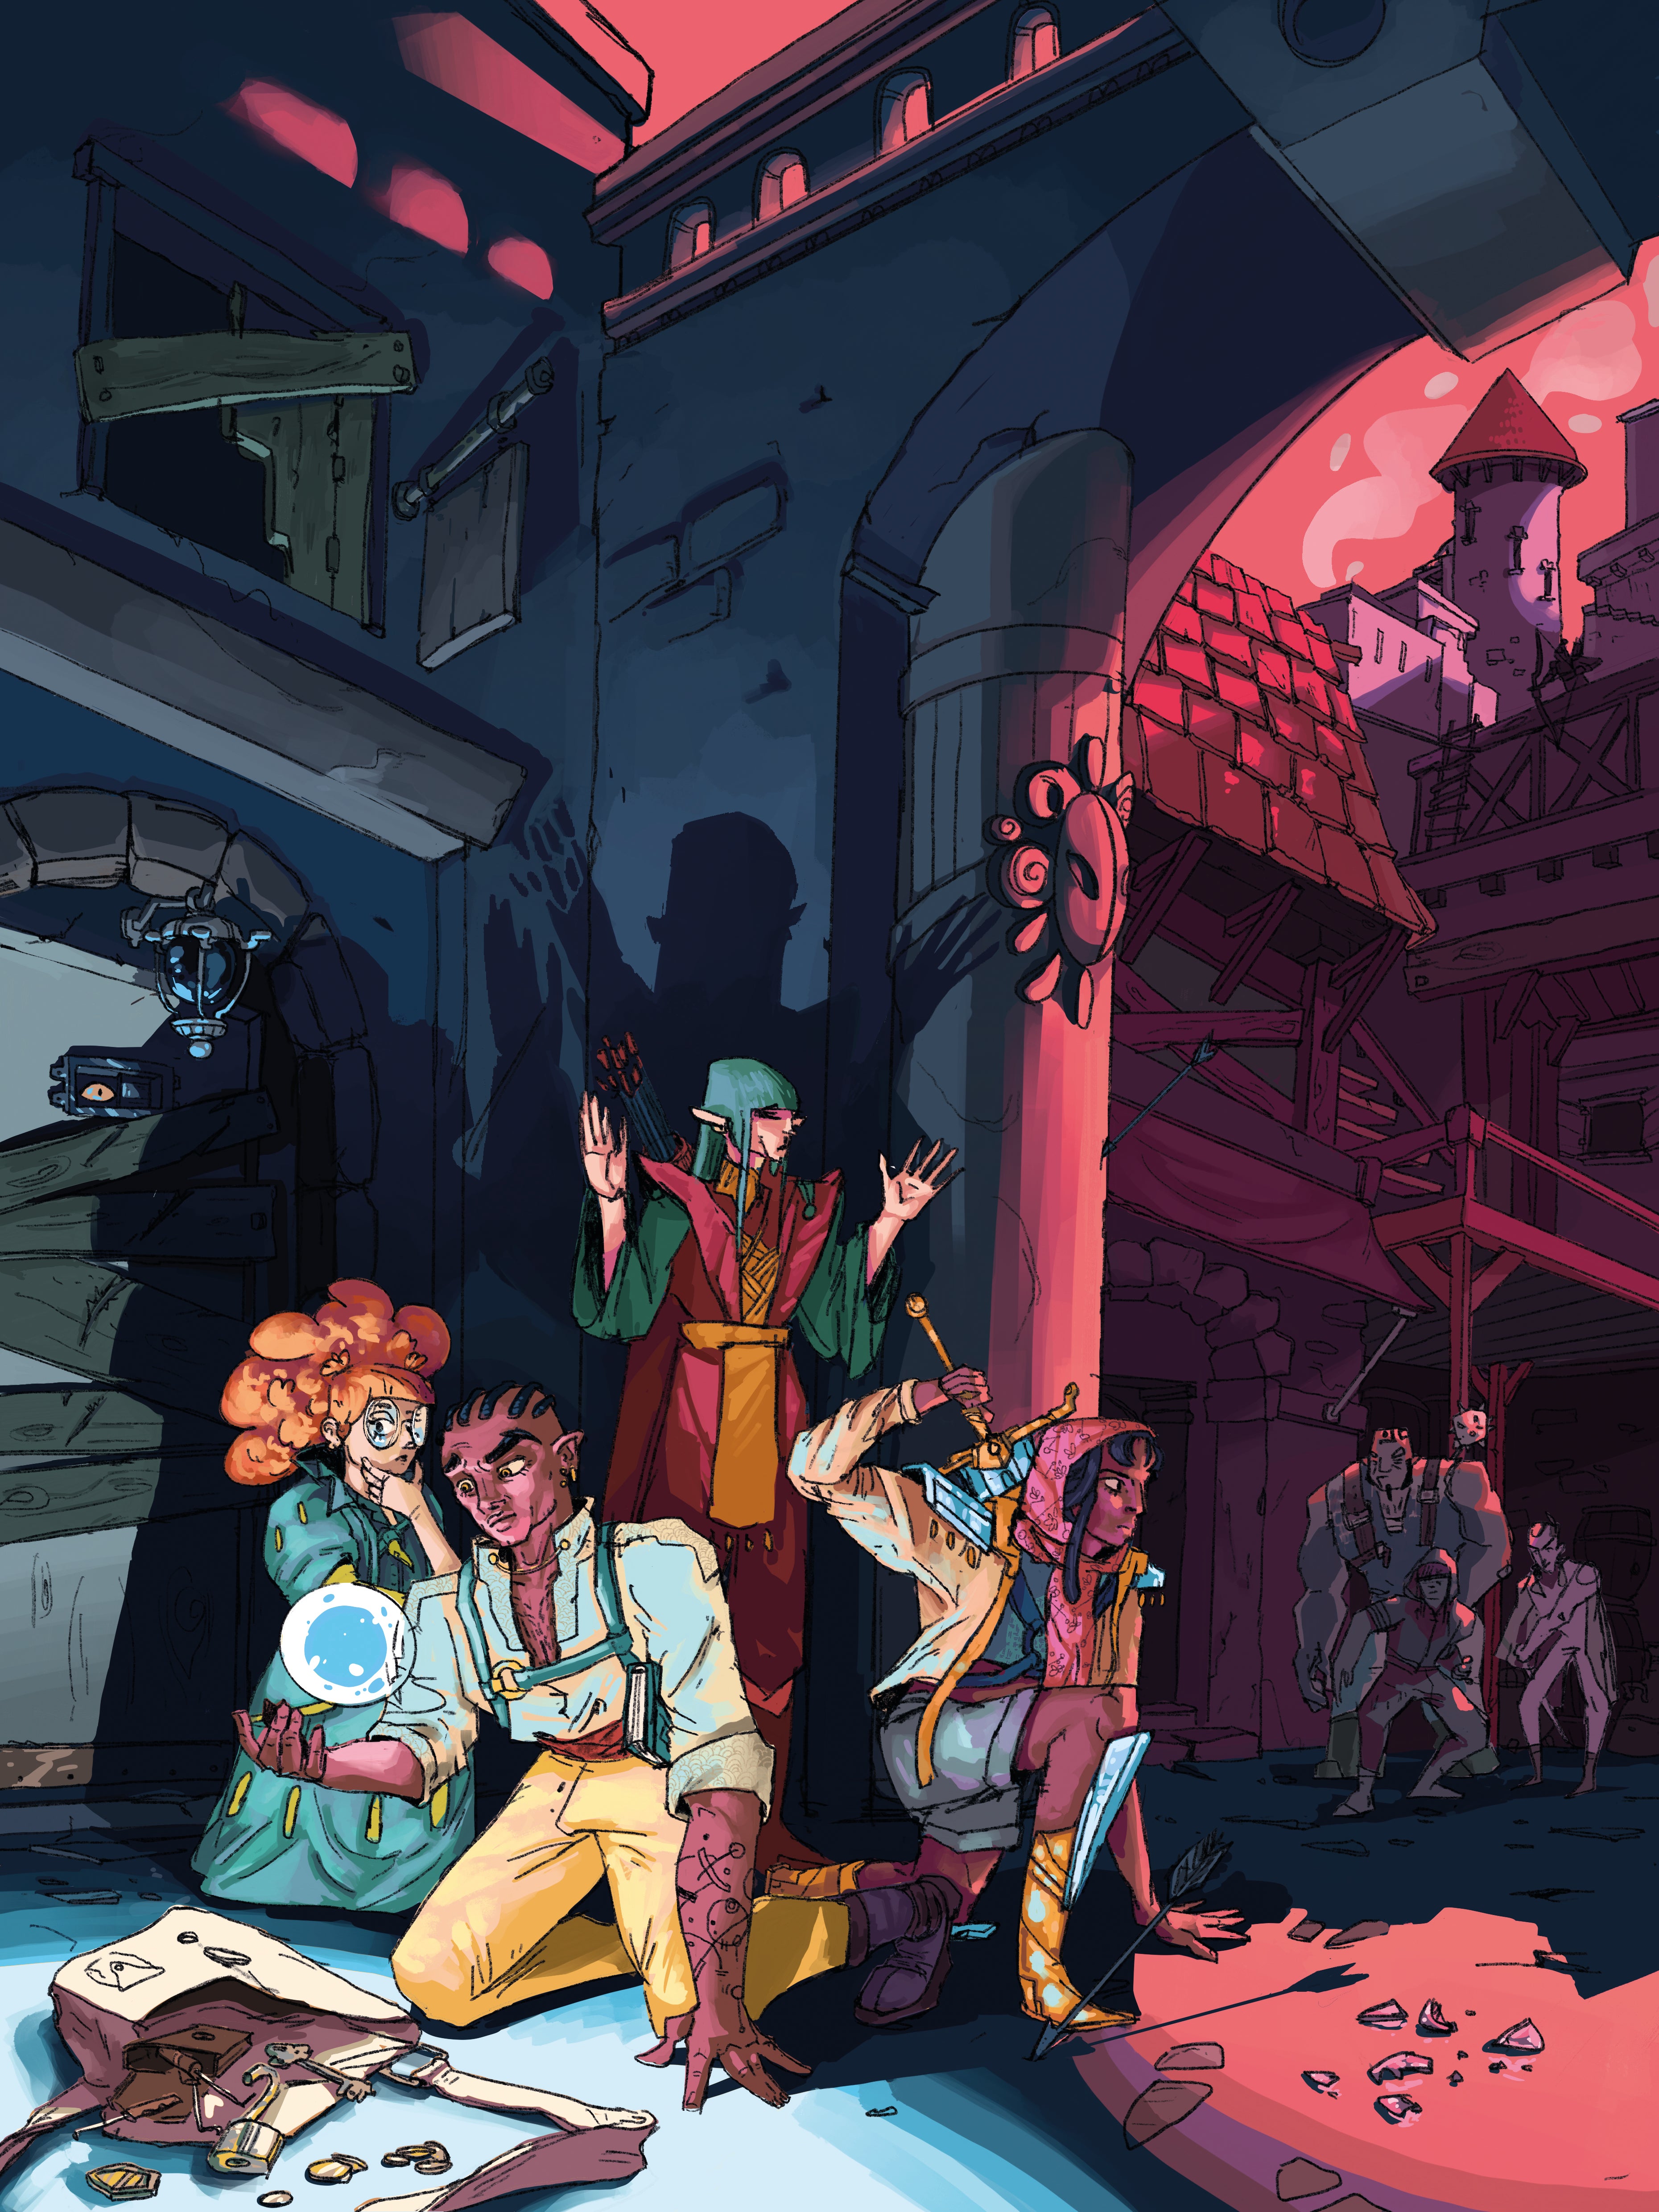 Image. A group of fantasy adventurers investigate a bag in an alleyway, while thugs approach from nearby shadows.